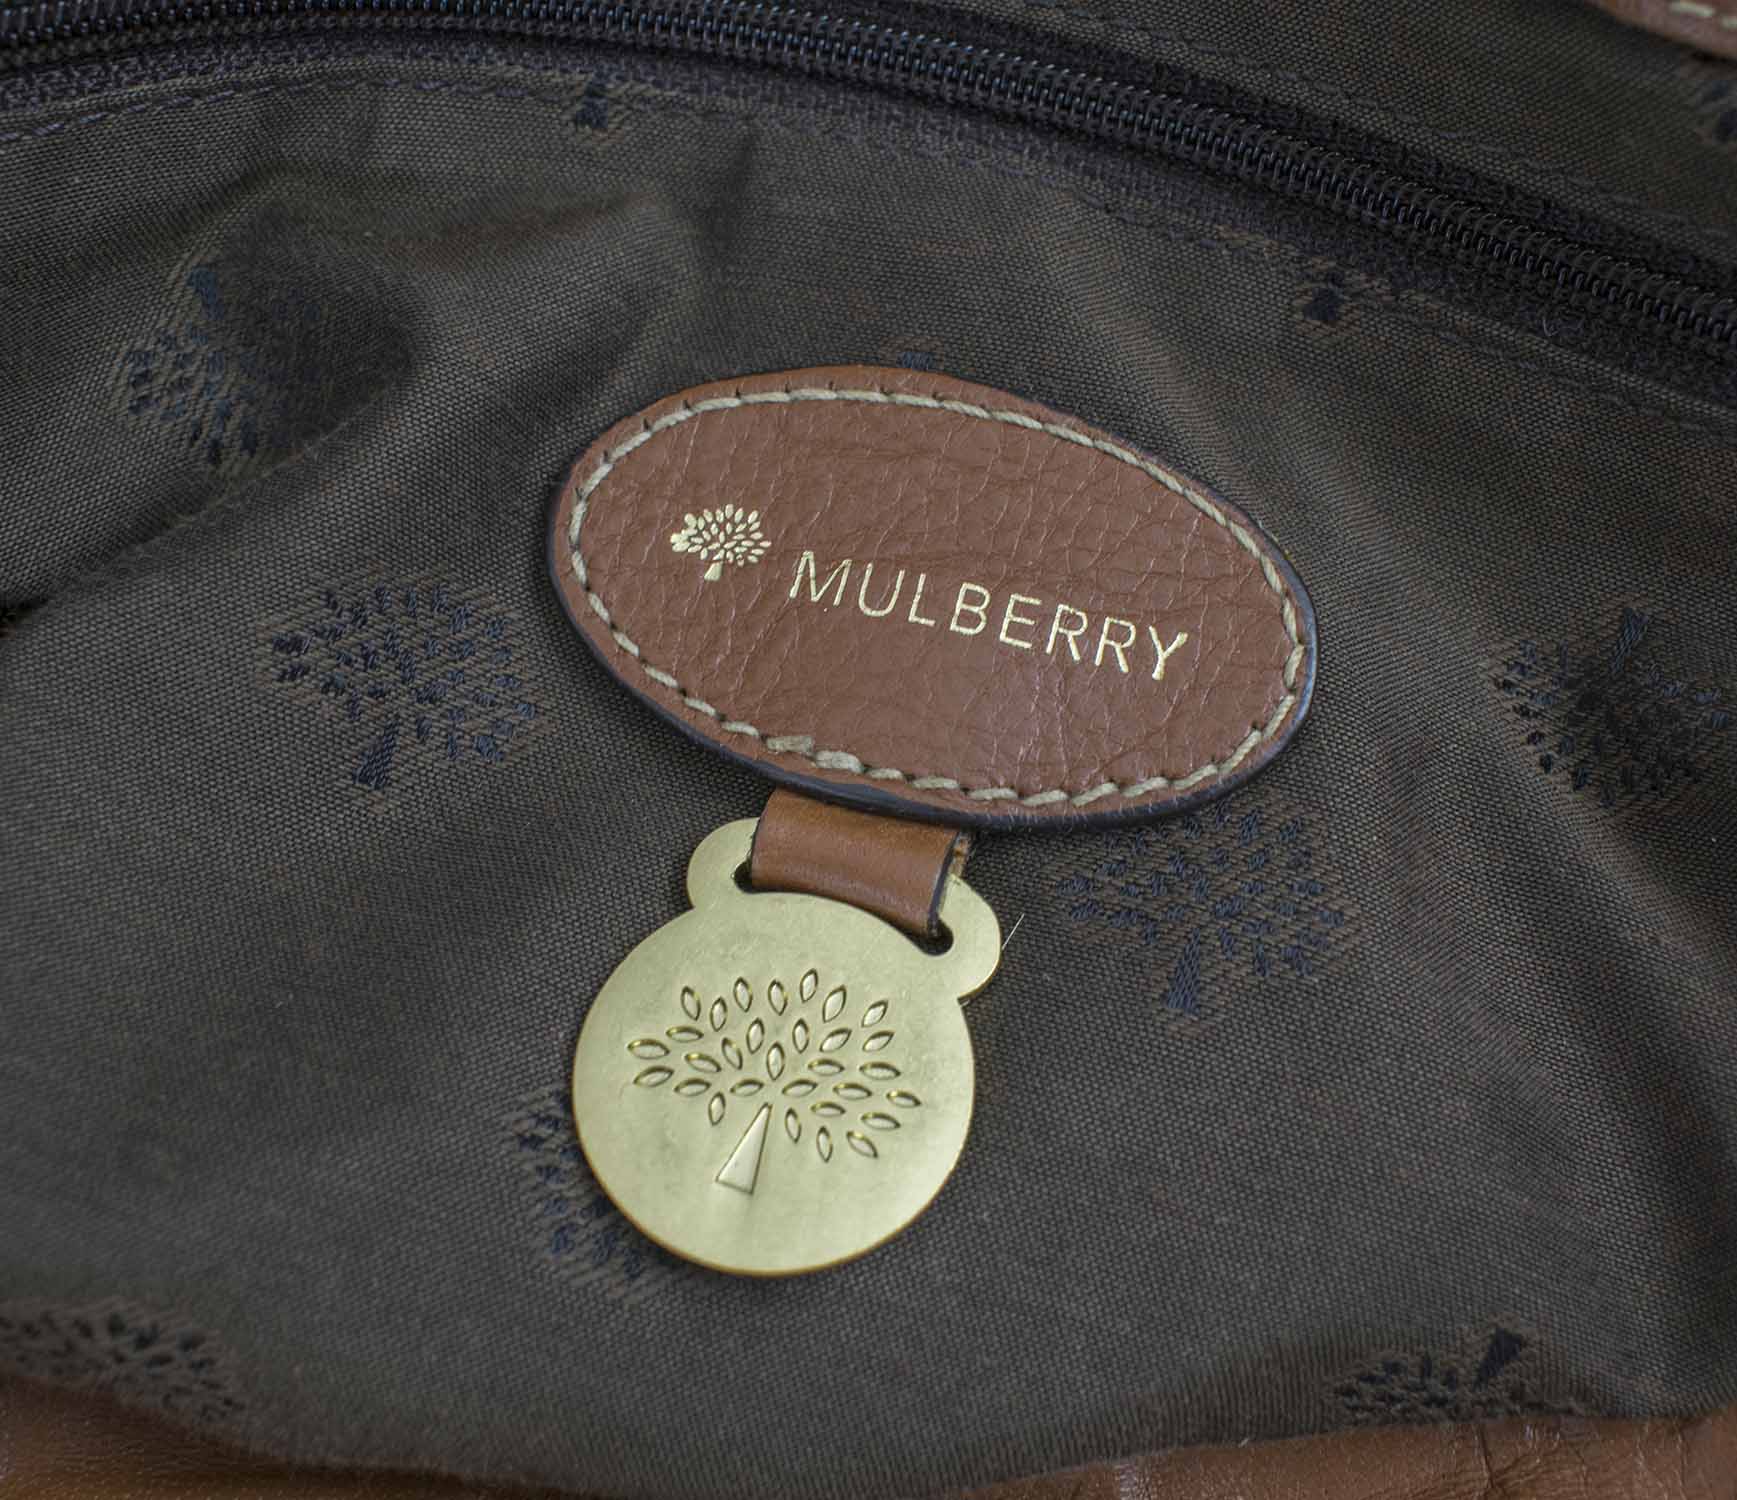 phony black Mulberry label  Mulberry bag, Mulberry, Mulberry handbags